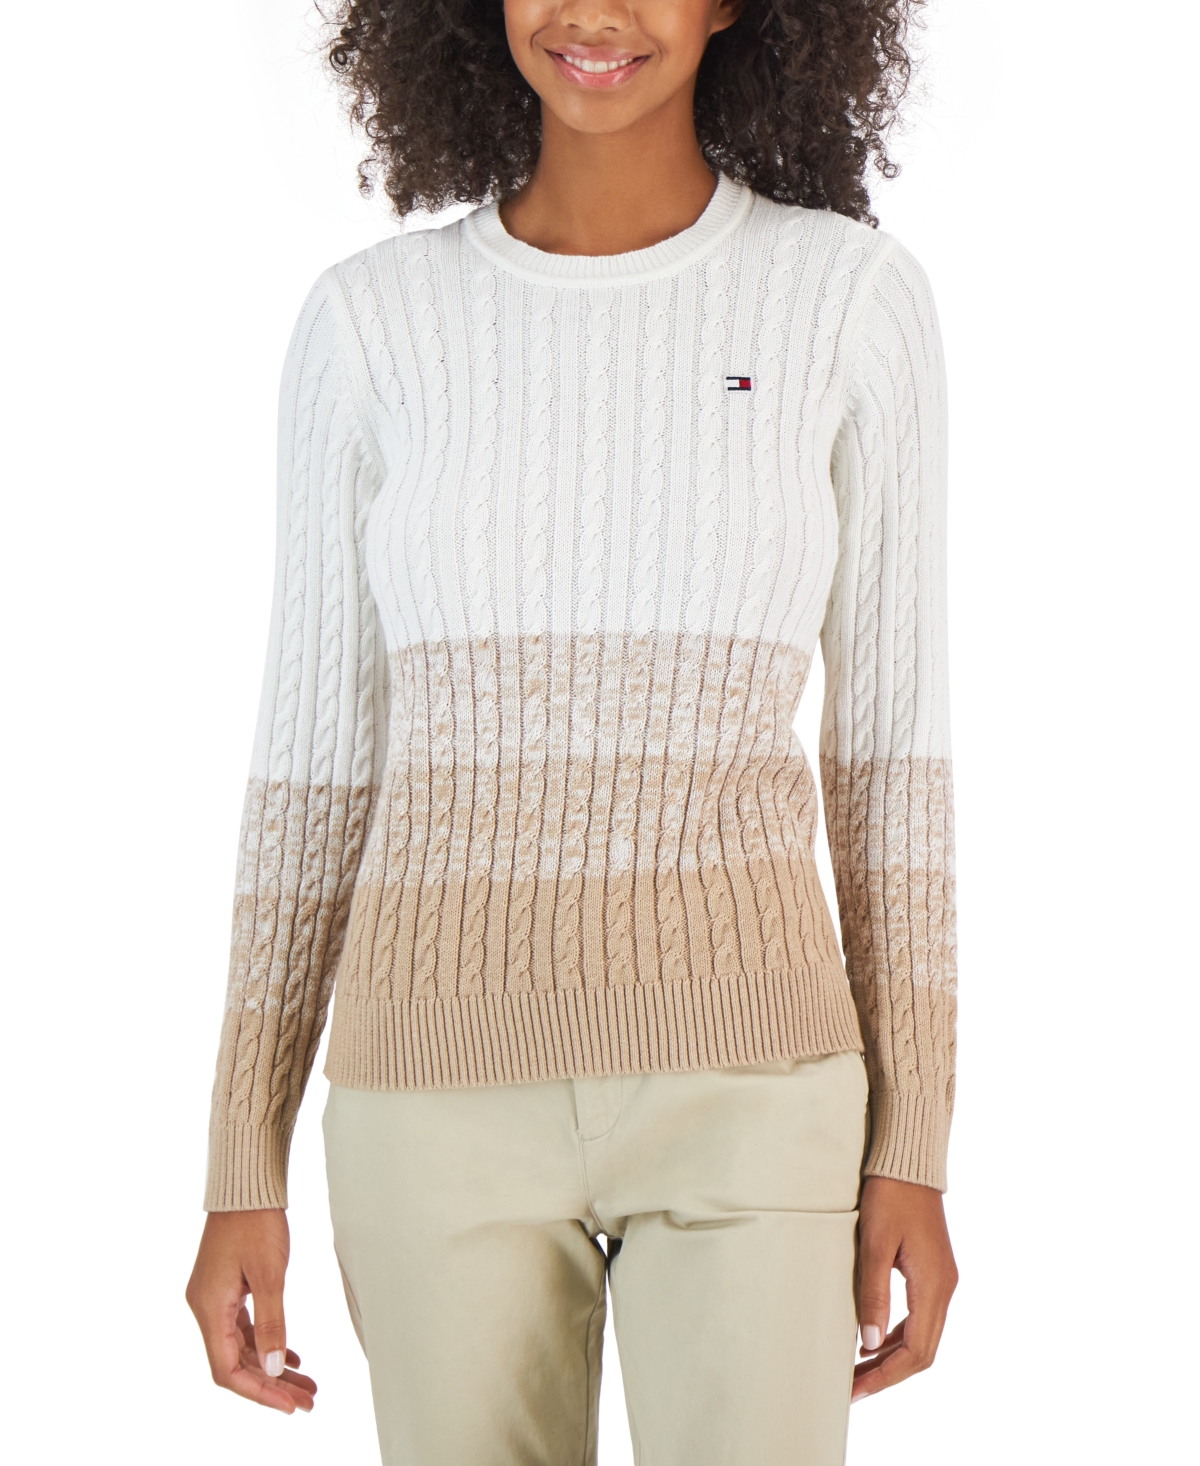 Tommy Hilfiger Women's Cotton Ombre Cable-Knit Sweater